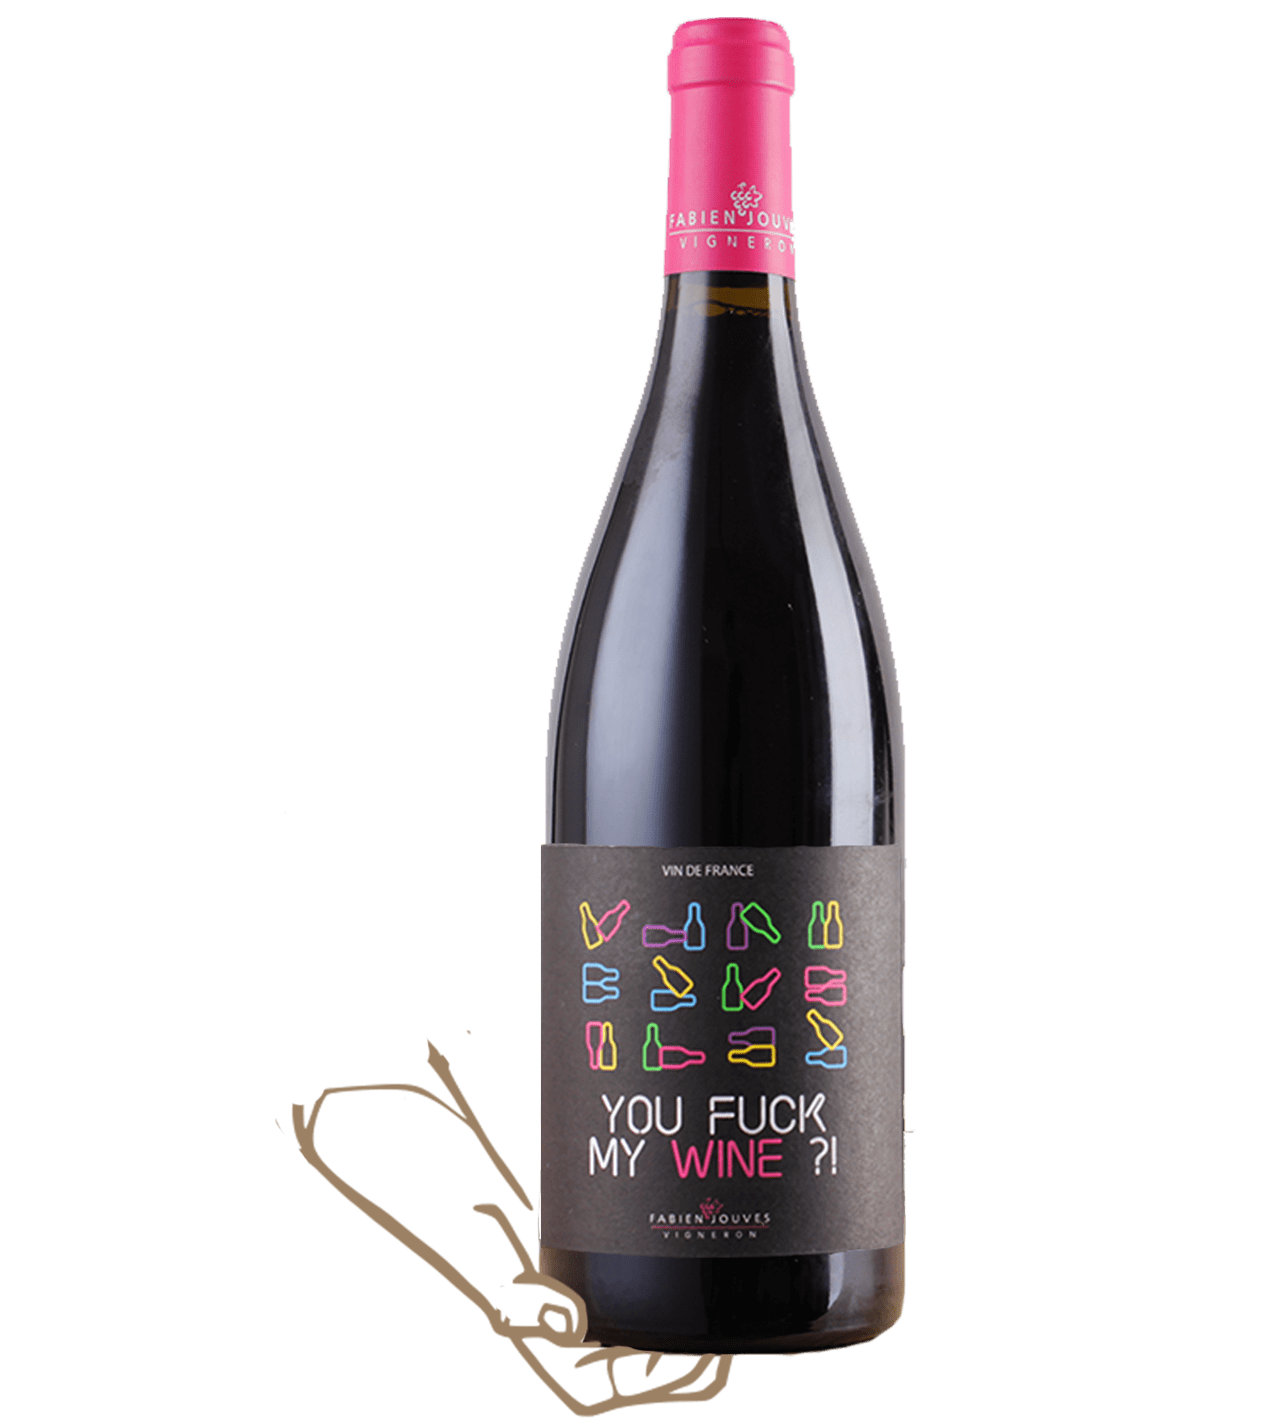 you fuck my wine is a natural wine by fabien jouves from mas del périé